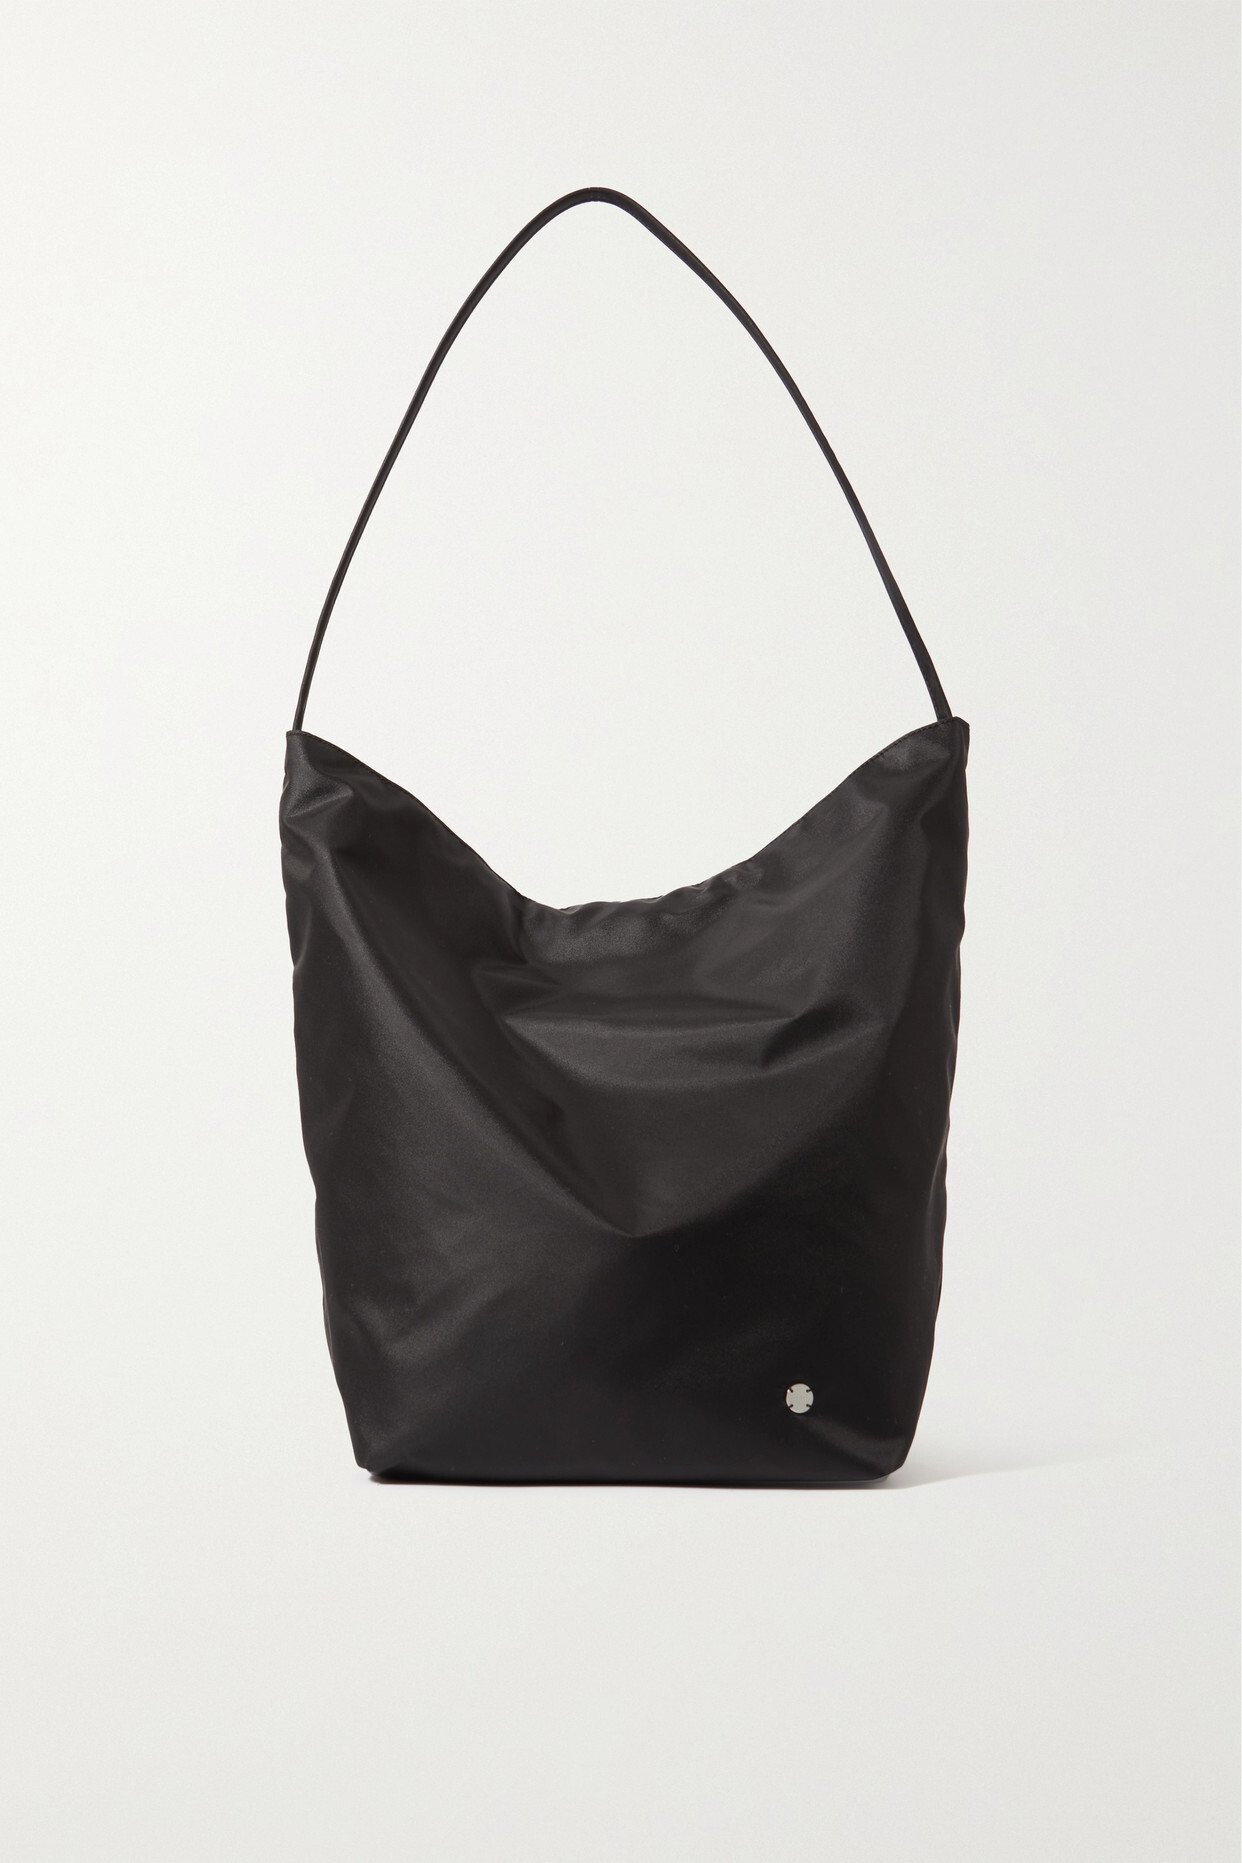 The Row - N/s Park Large Shell Tote - Black